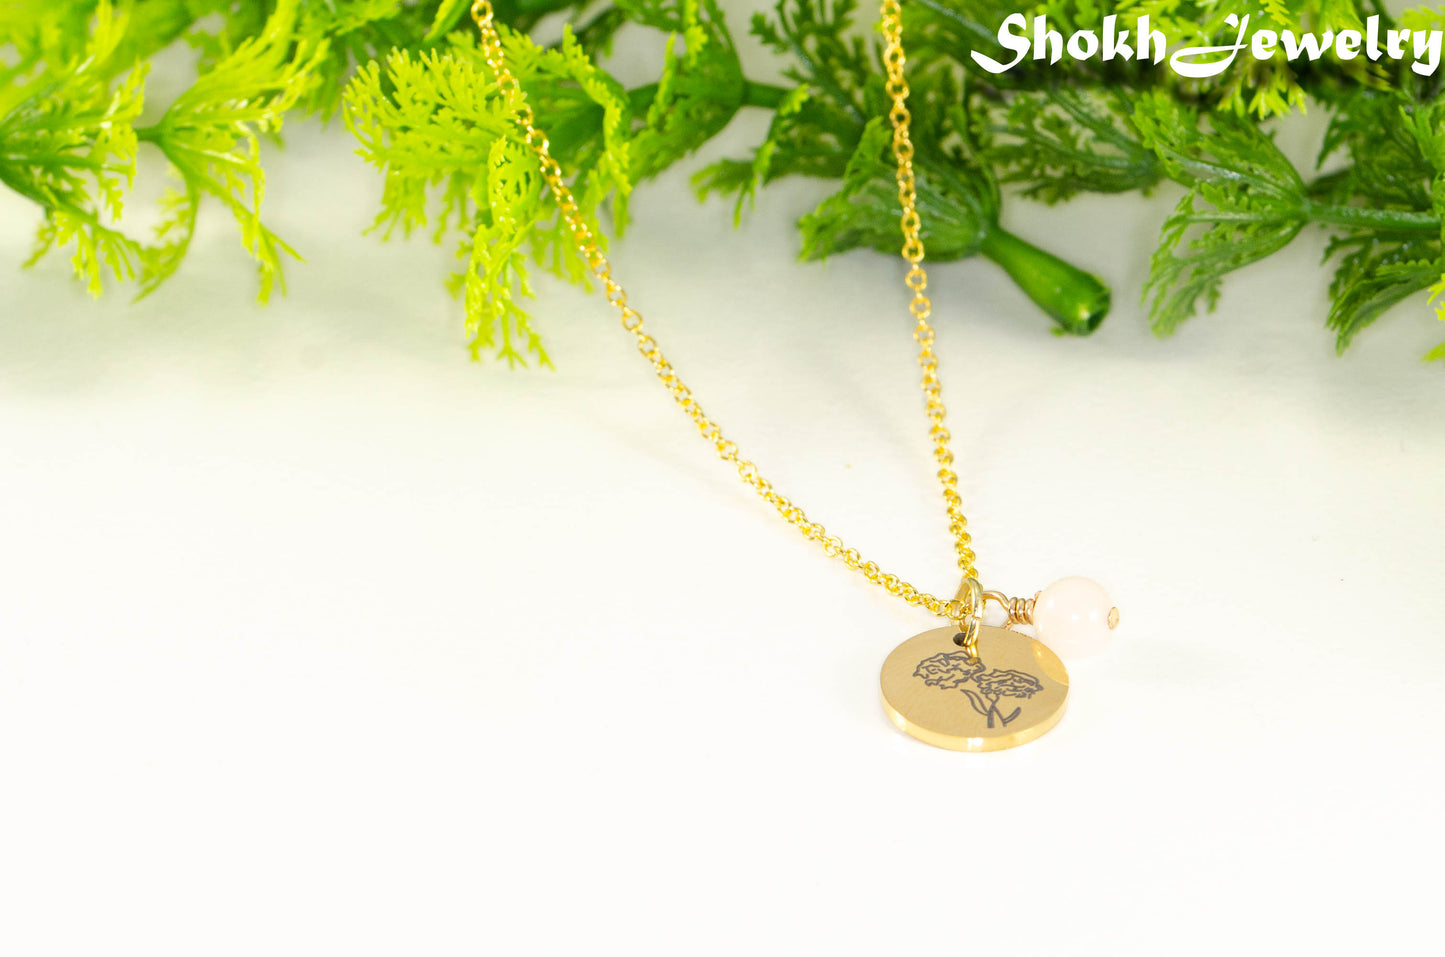 Gold Plated October Birth Flower Necklace with Rose Quartz Birthstone Pendant.